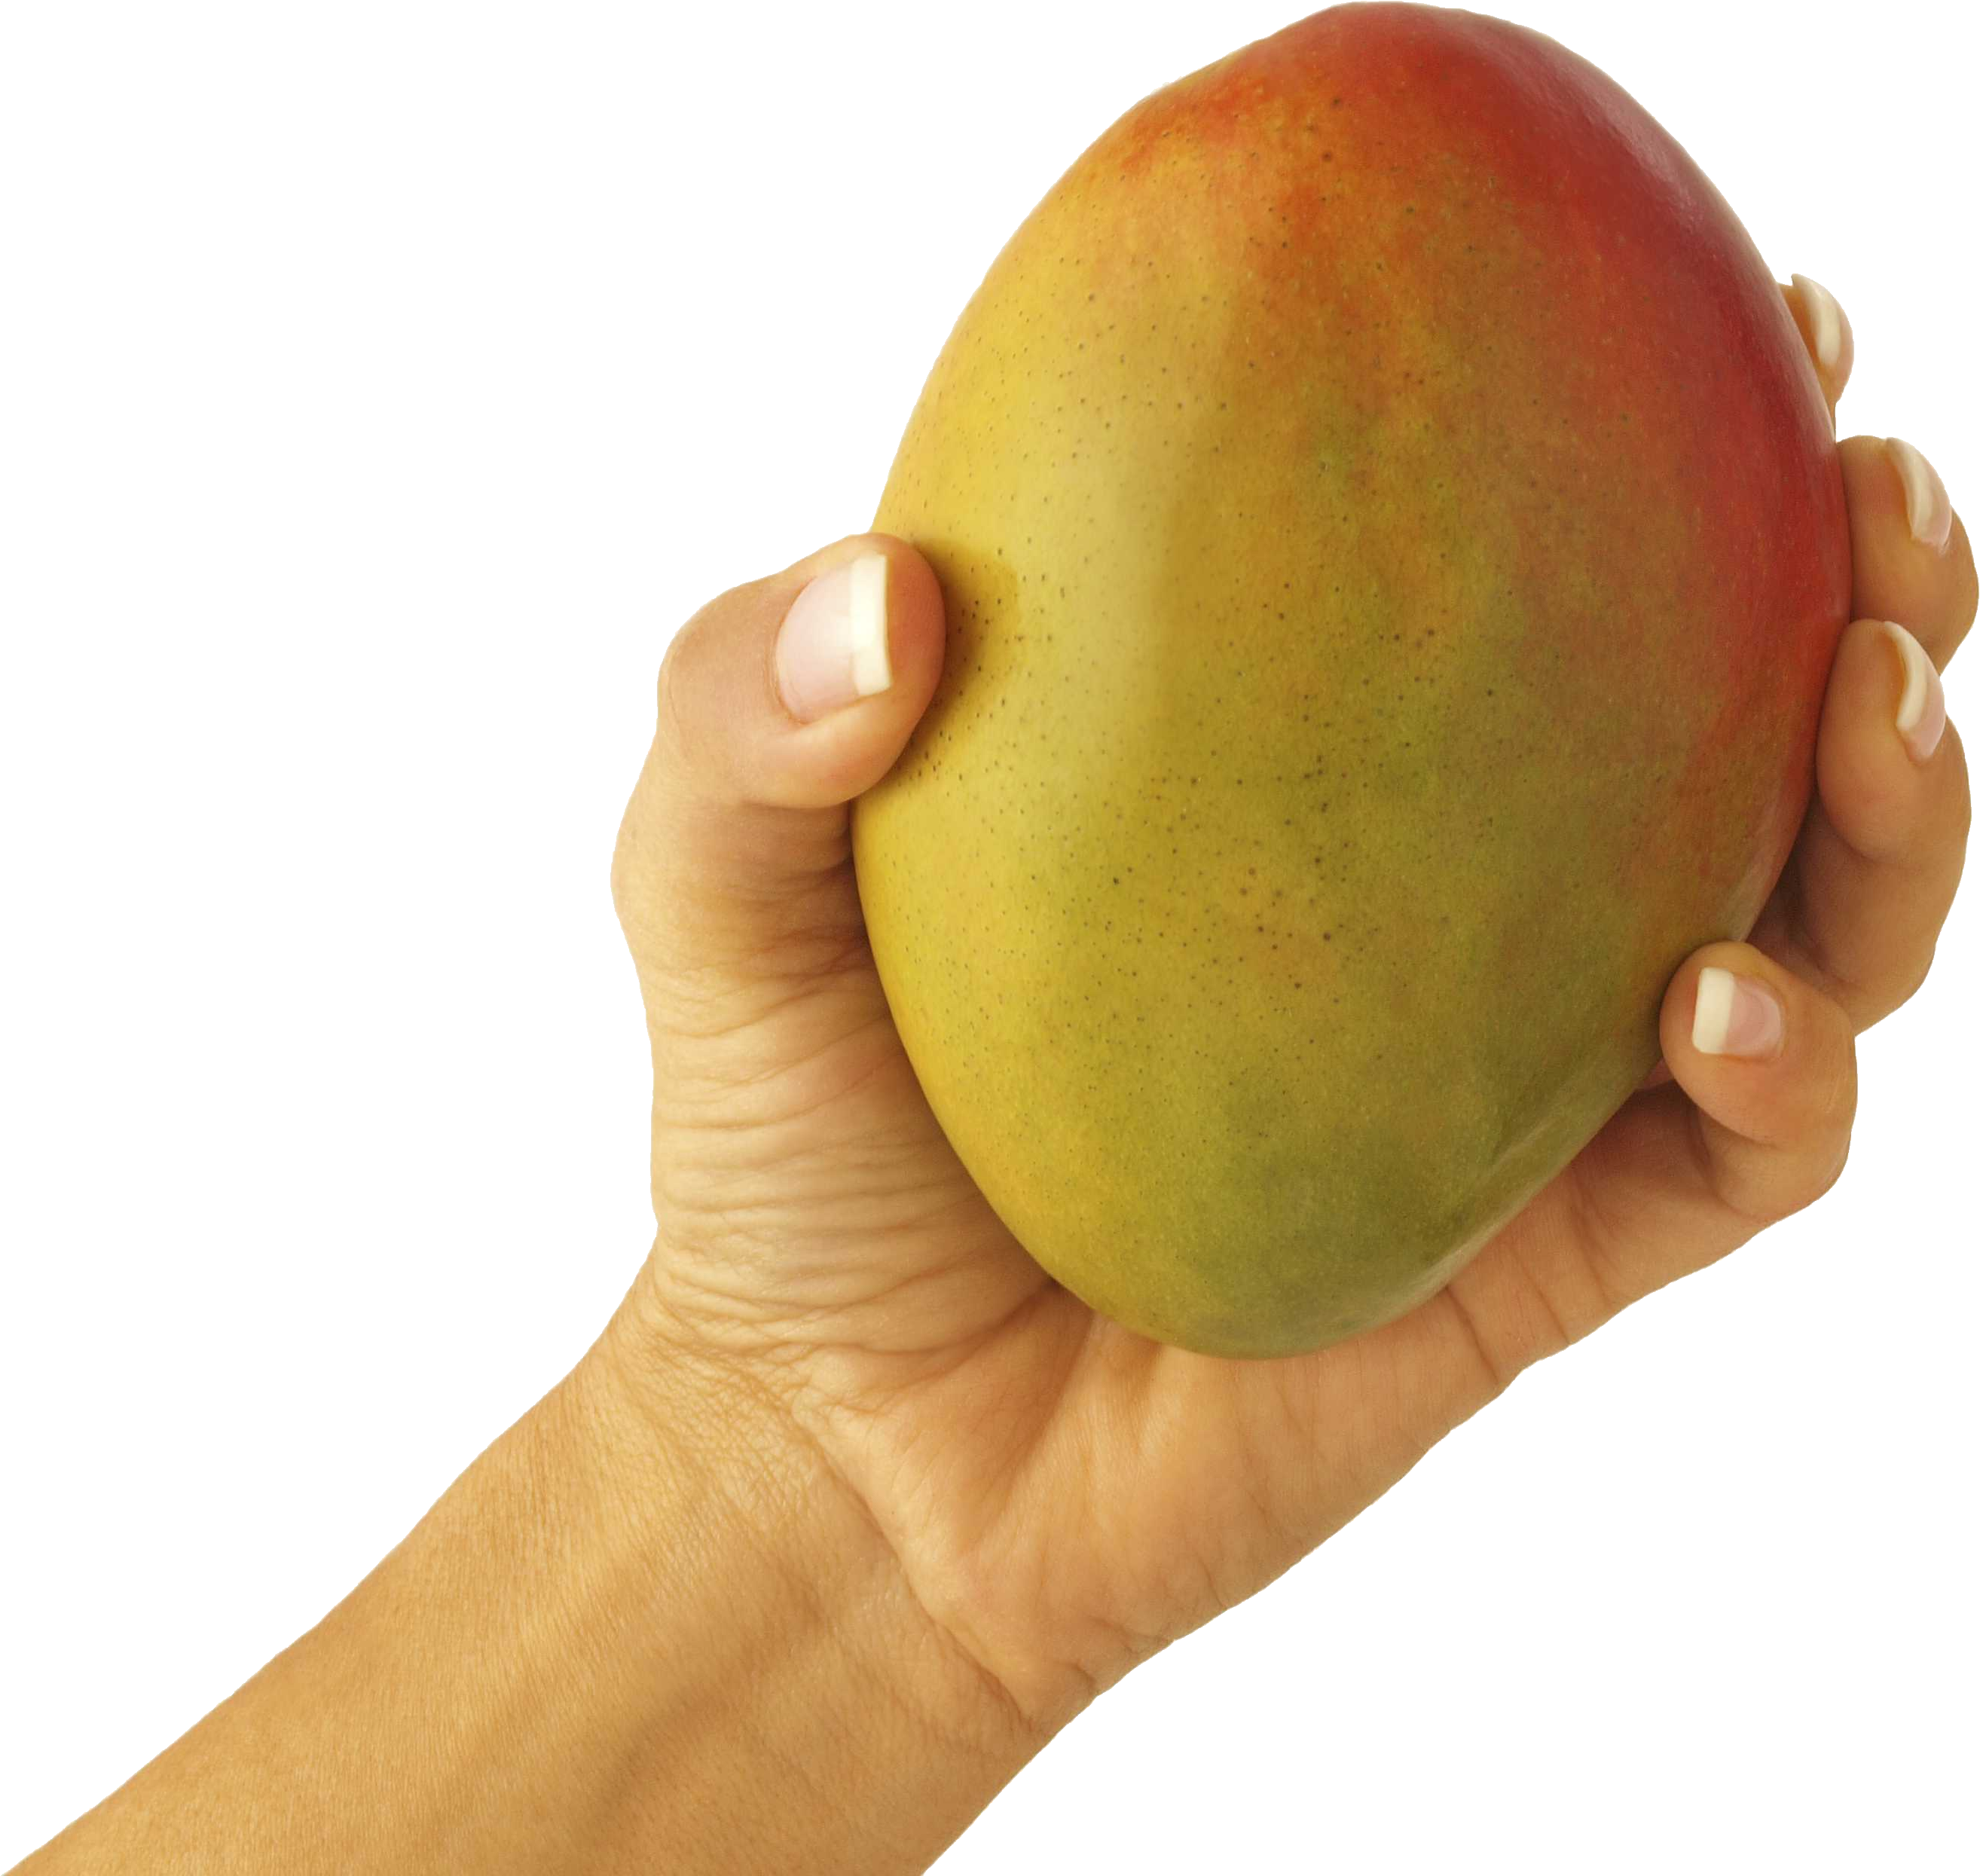 Mango in hand PNG image